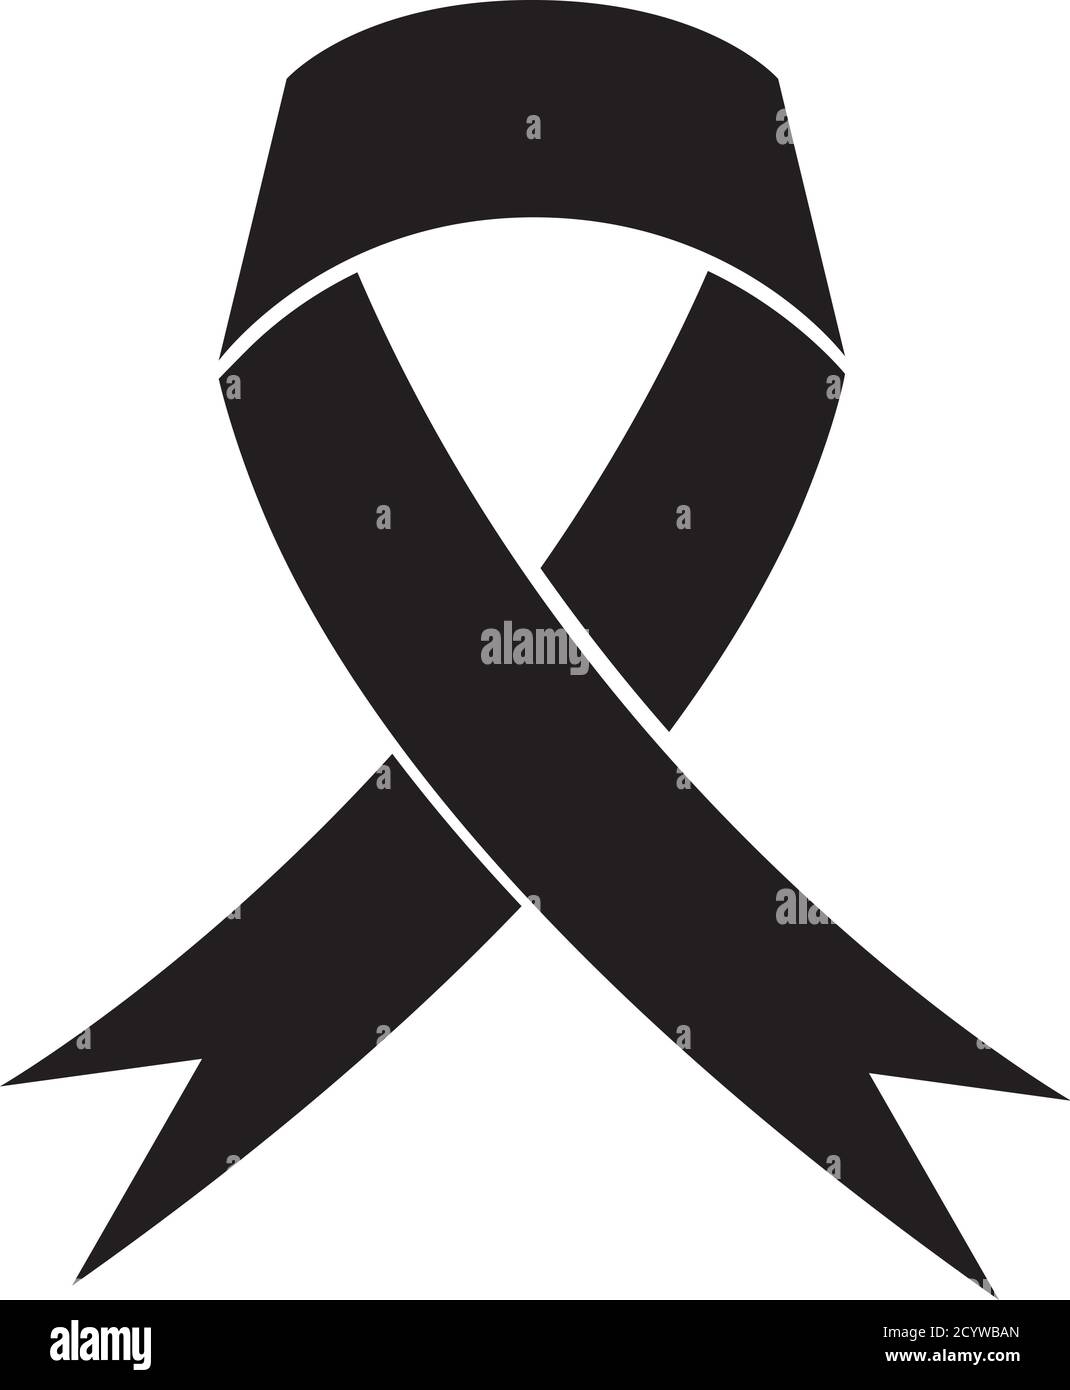 Mourning and melanoma support symbol Stock Vector